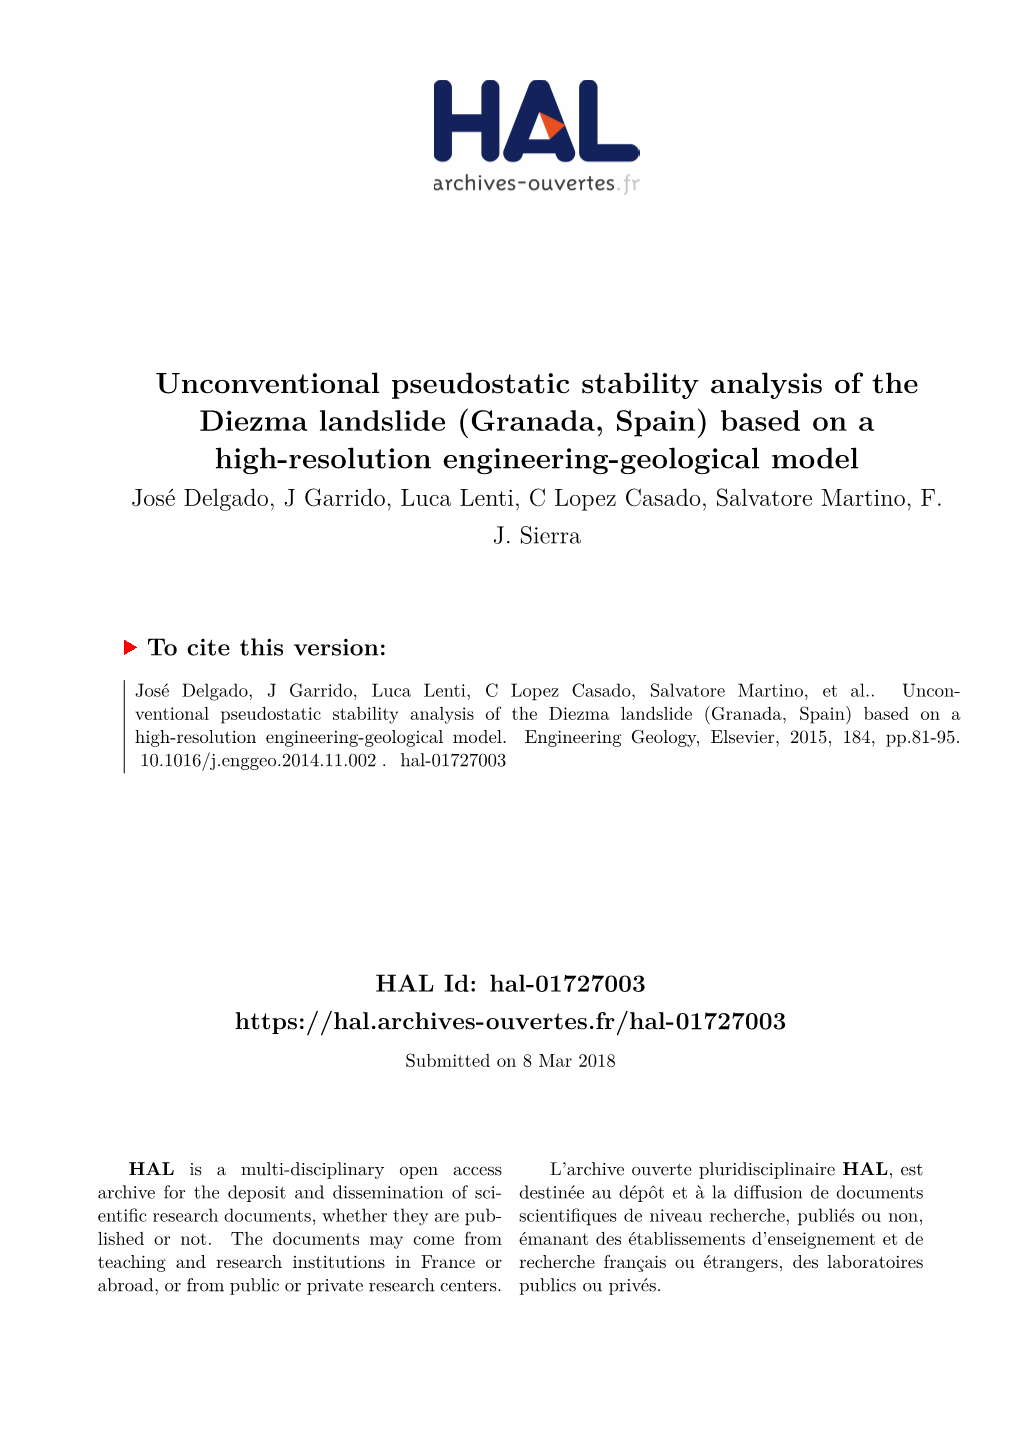 Unconventional Pseudostatic Stability Analysis of the Diezma Landslide